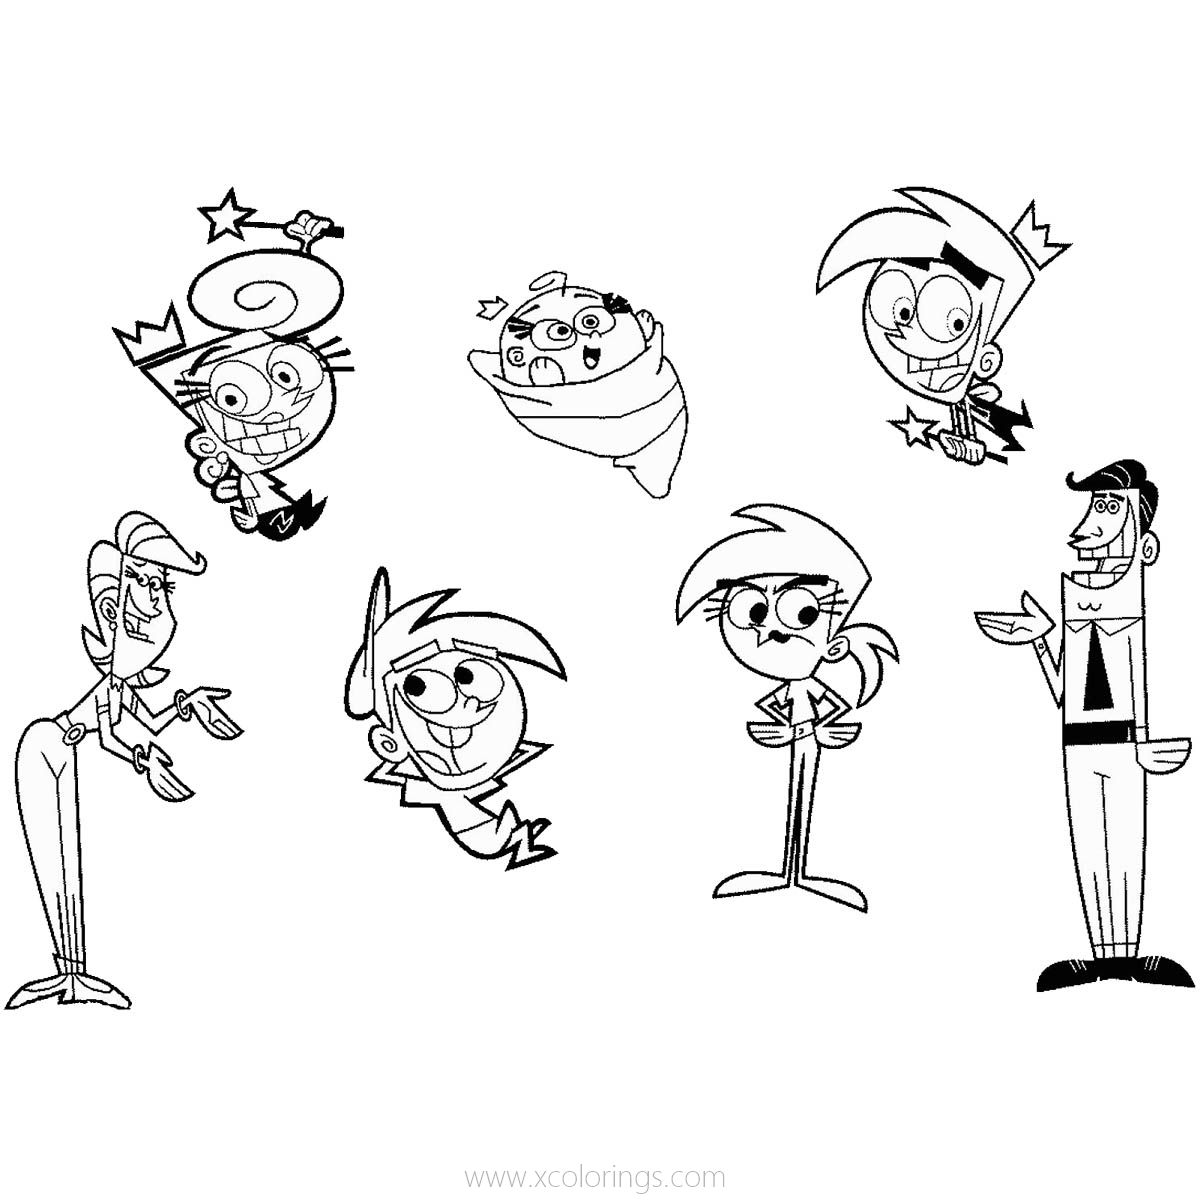 Free Fairly Odd Parents Coloring Pages Characters printable